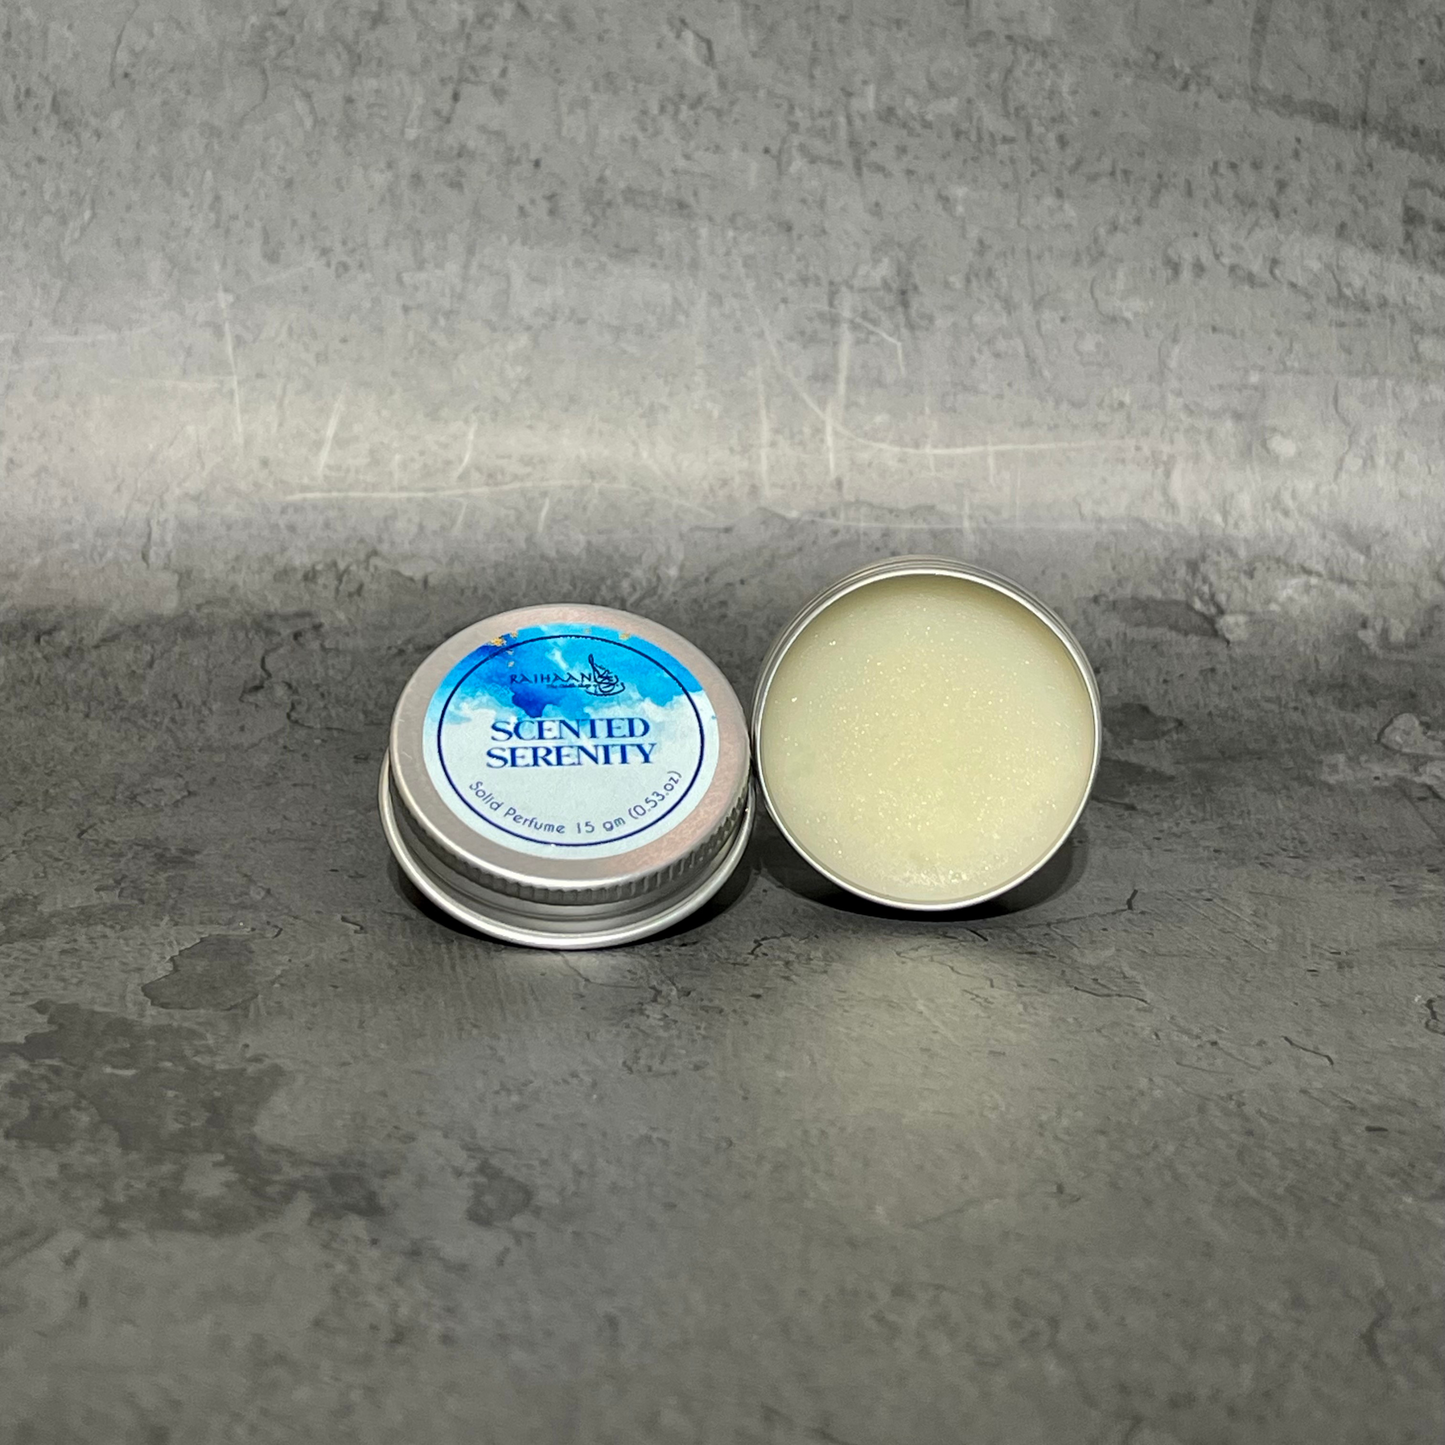 Solid Perfume Scented Serenity-15Gm